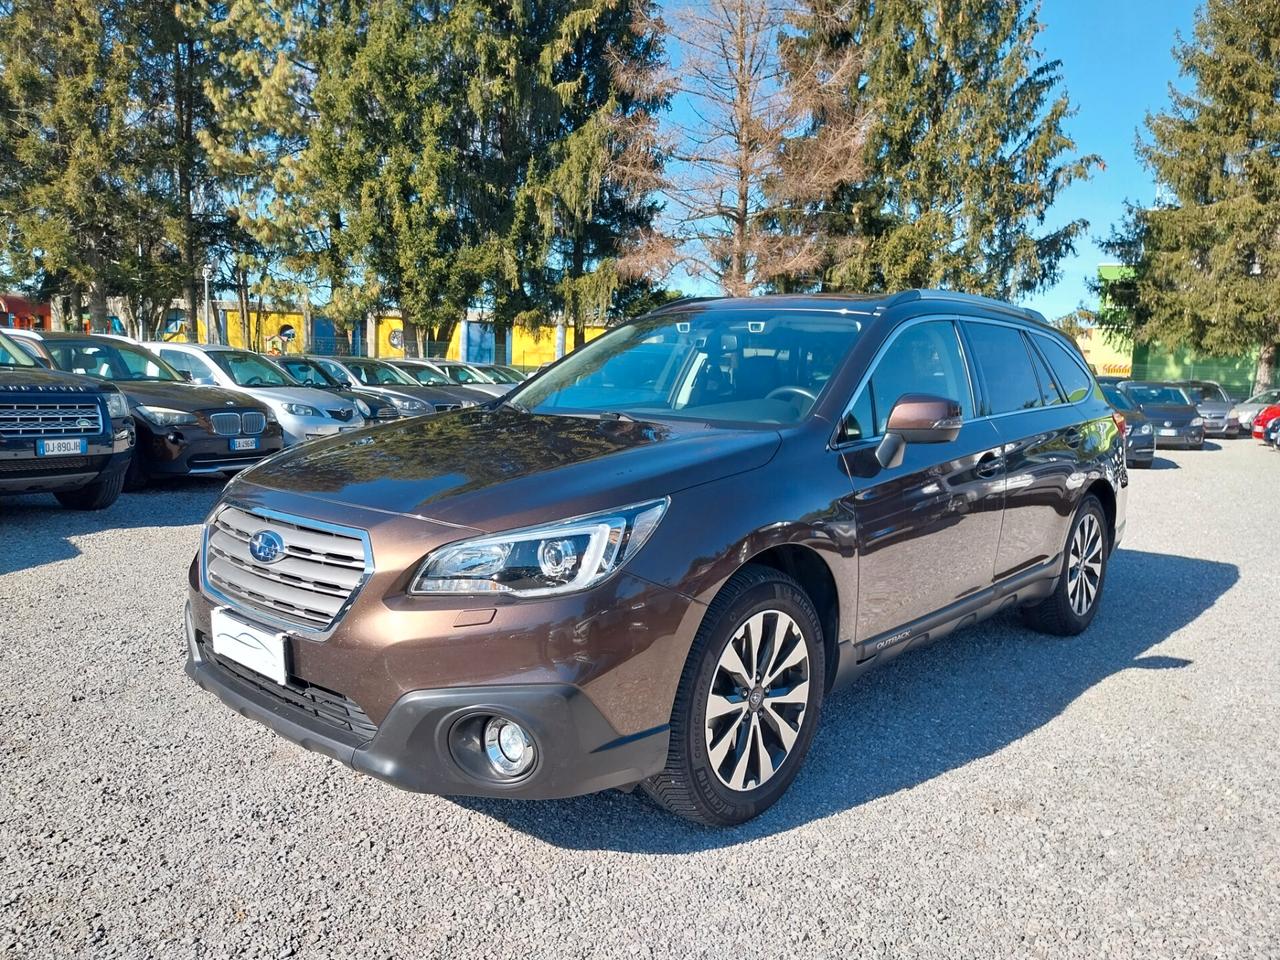 Subaru OUTBACK 2.0d Lineartronic Unlimited